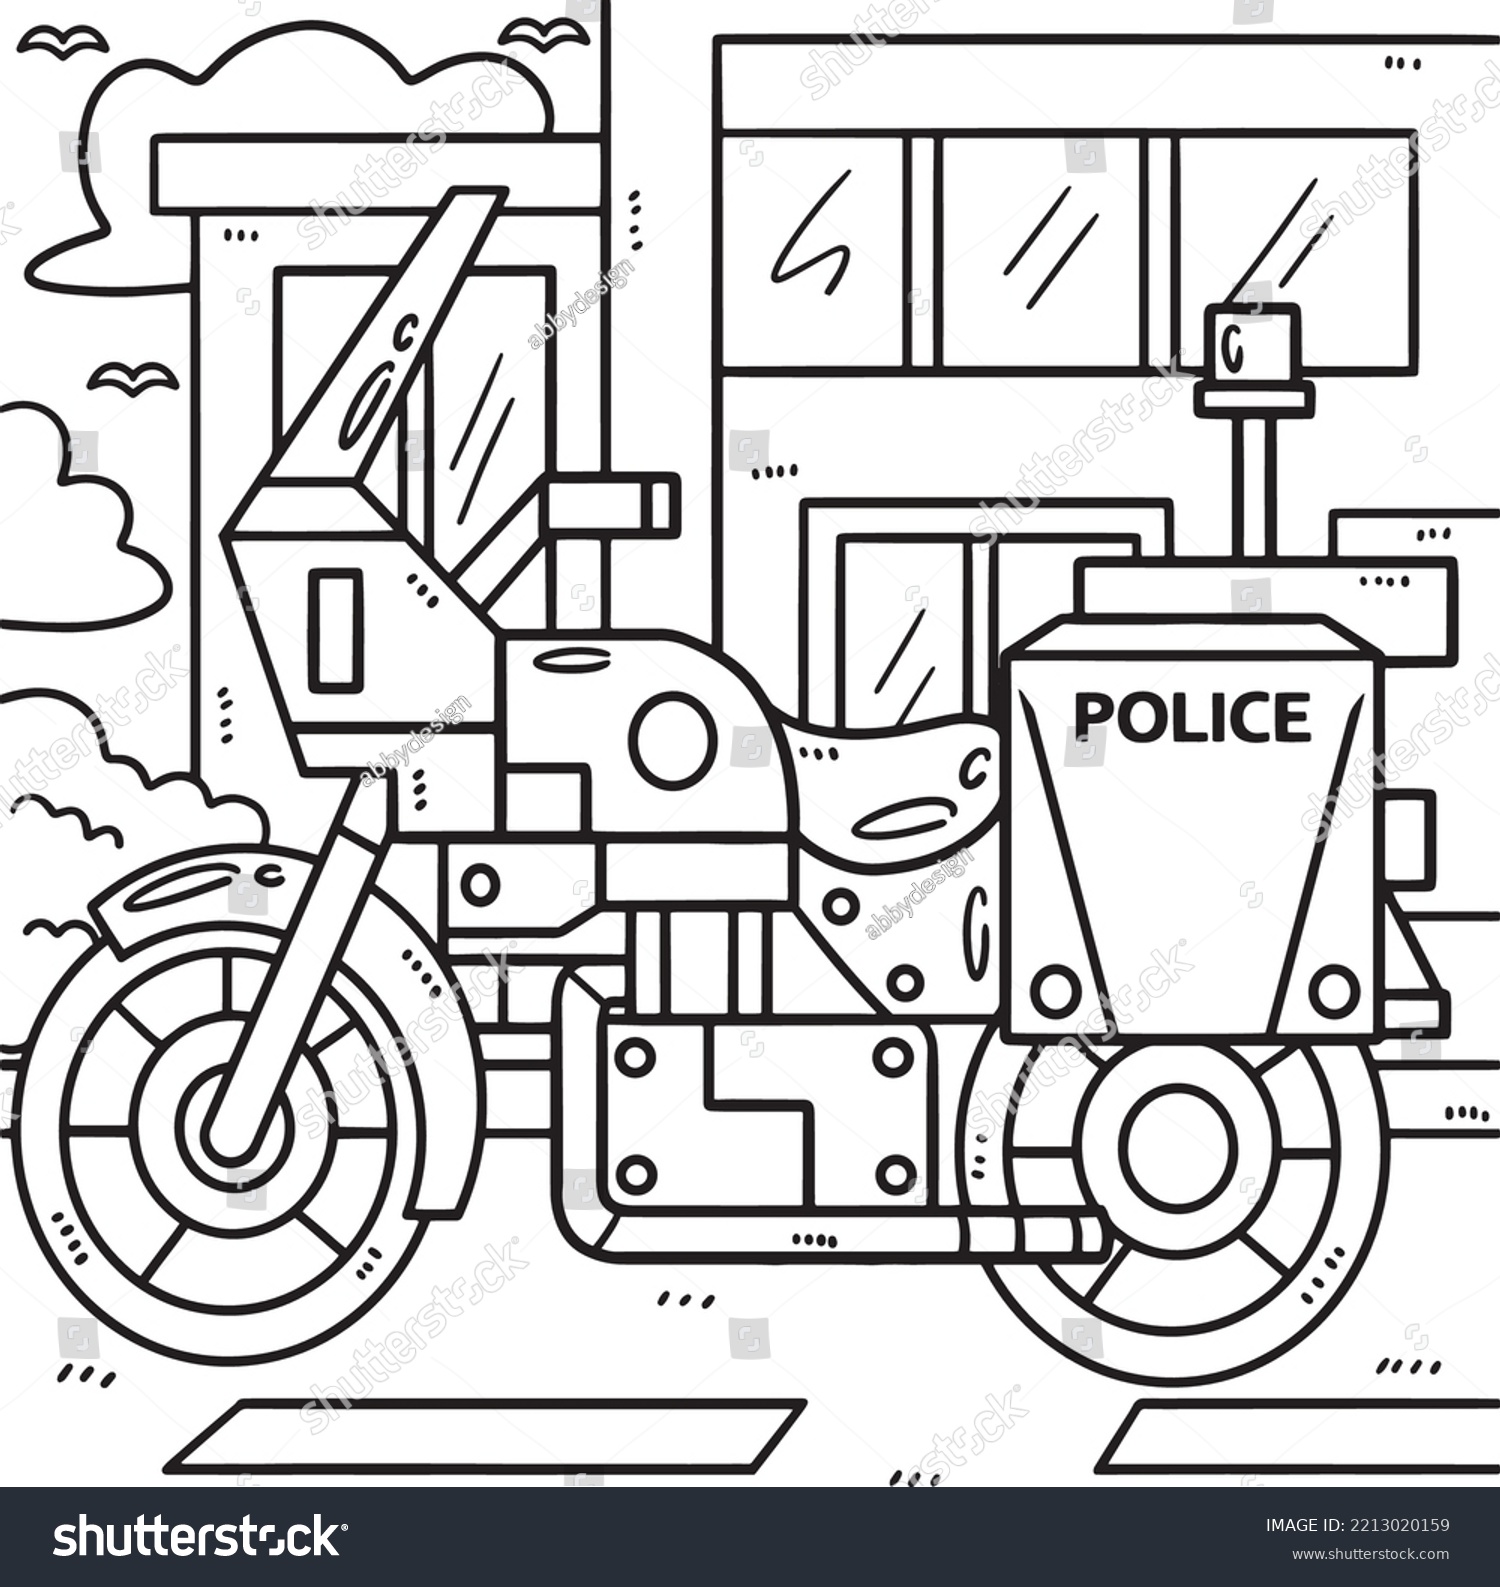 Police Motorcycle Coloring Page Kids Stock Vector (Royalty Free ...